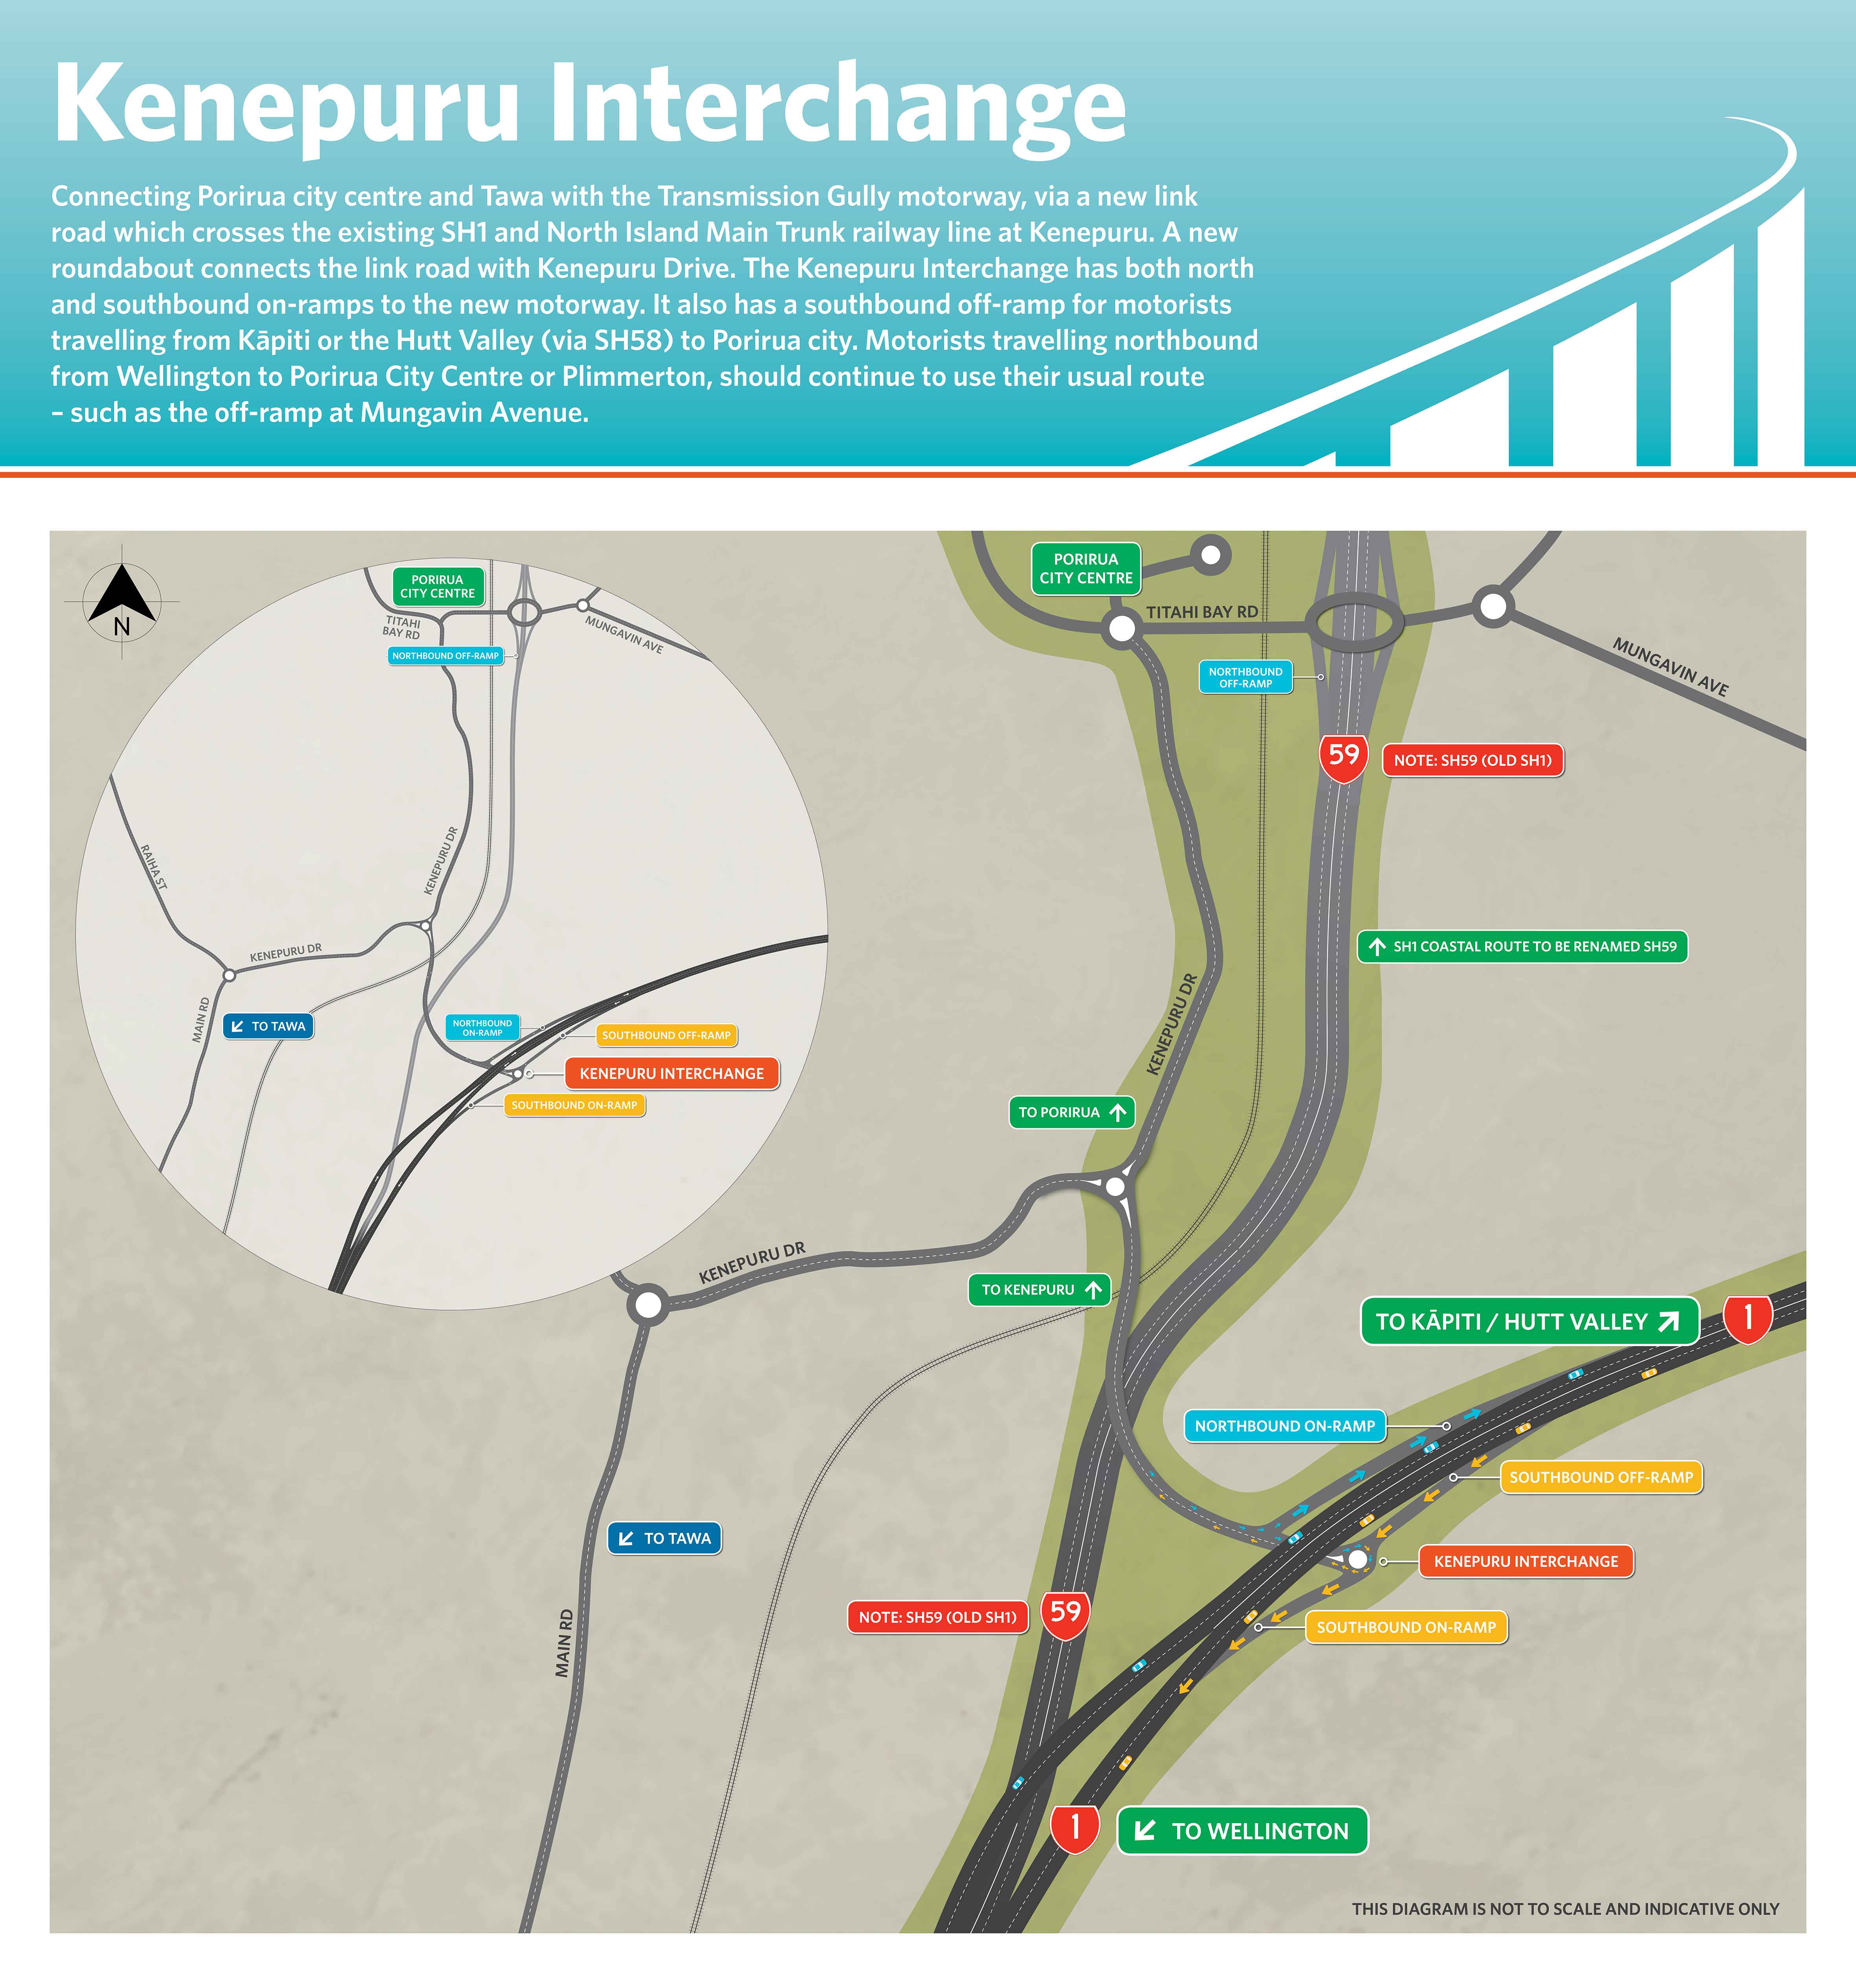 Directional arrows on a map showing how to use the Kenepuru Interchanges